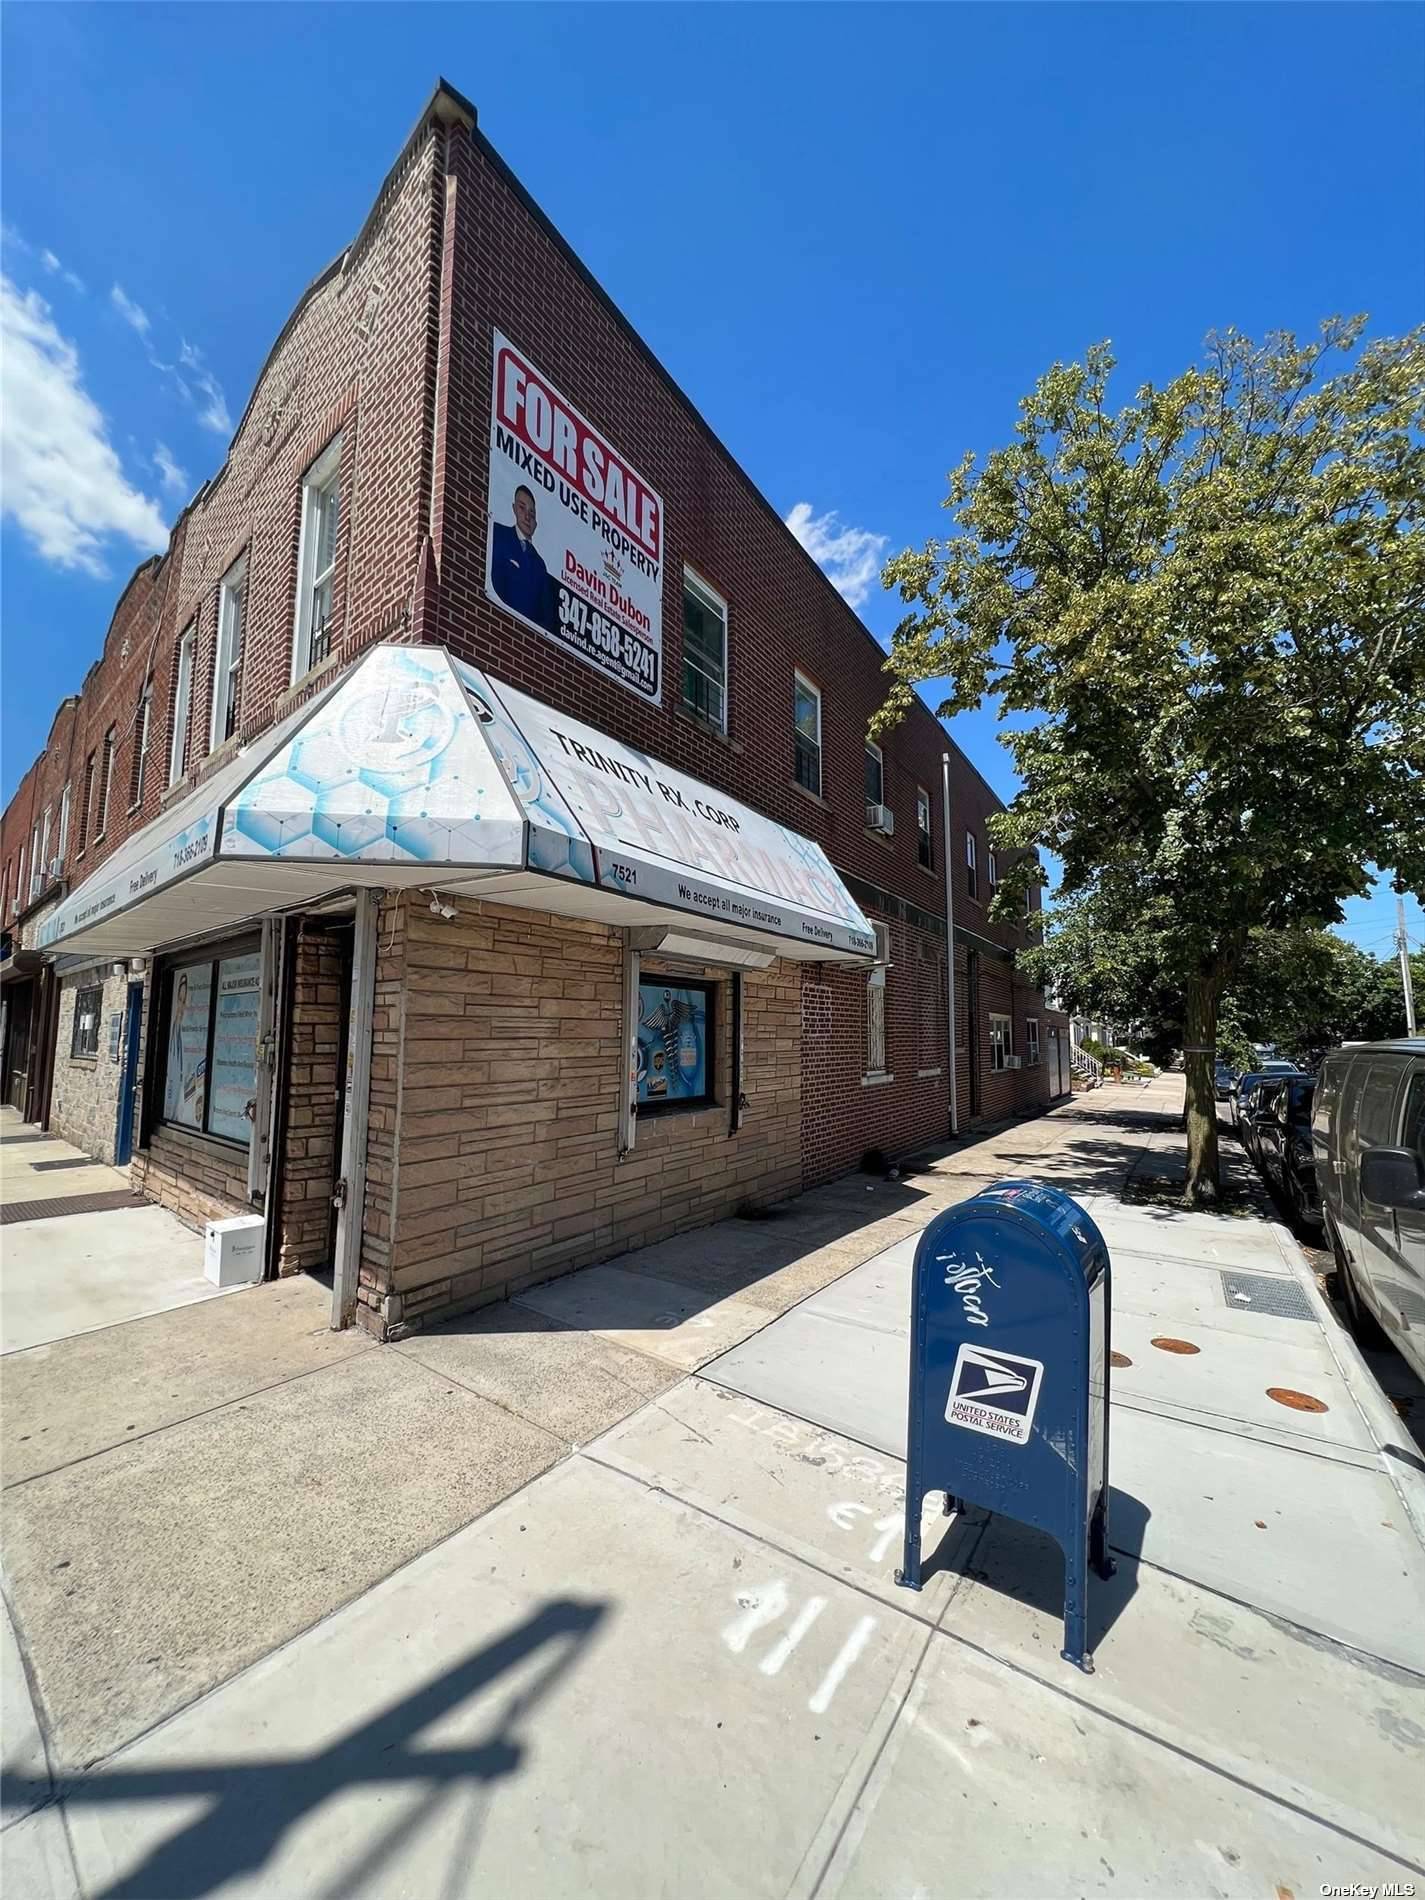 Welcome to 75 21 Myrtle Ave, a stunning brick mixed use property.